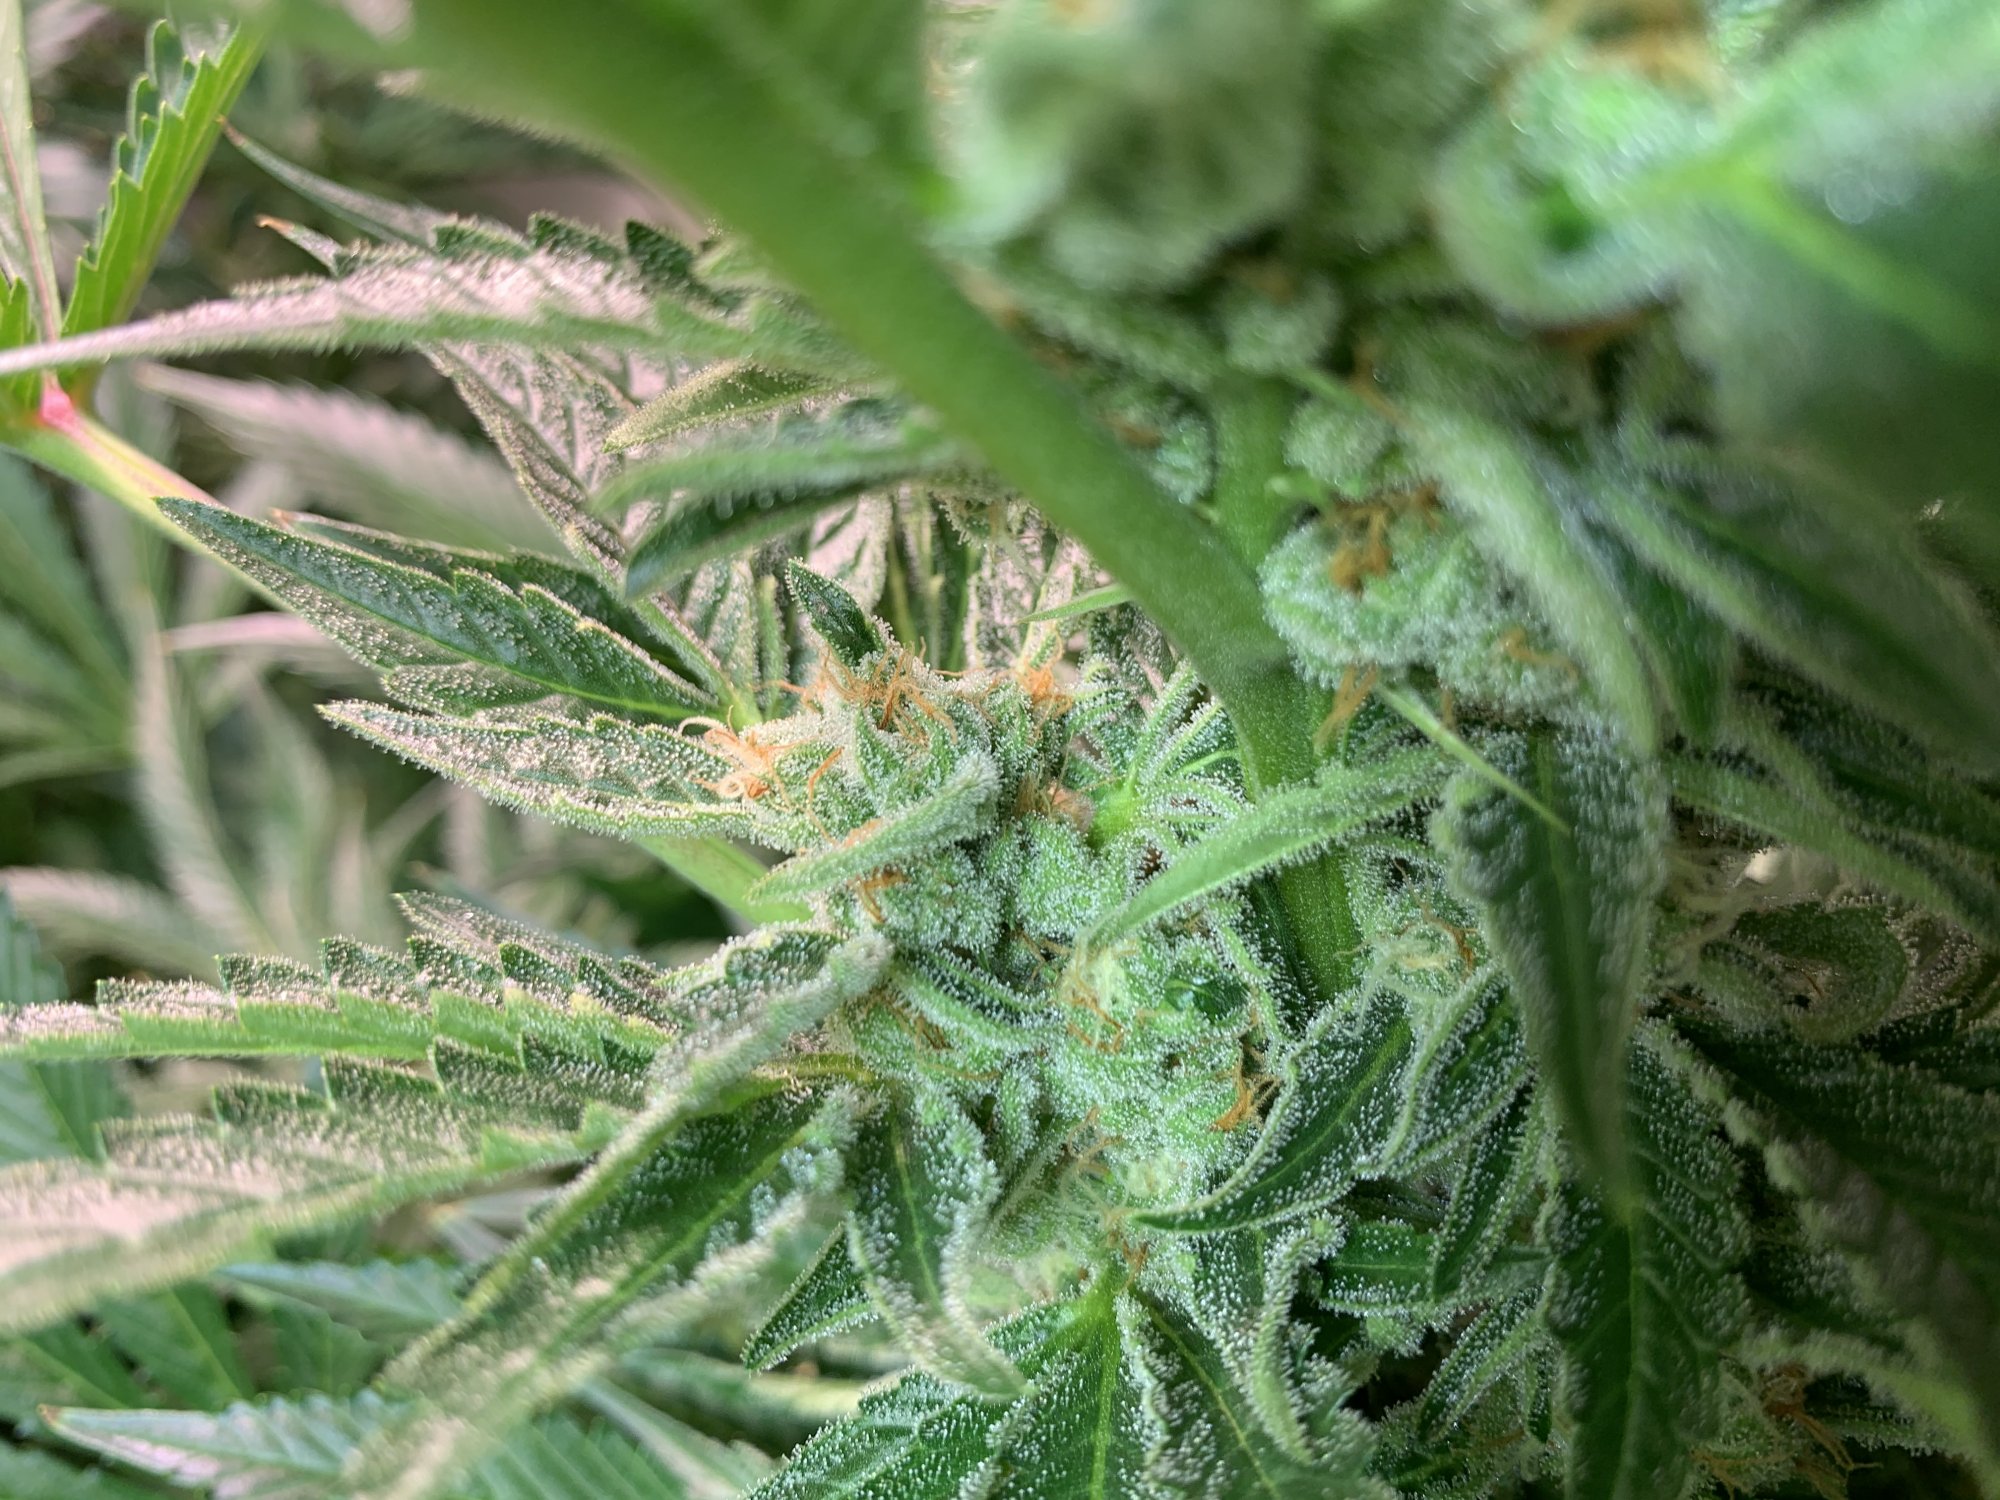 Need advice on cause for poor bud sizedevelopment 2